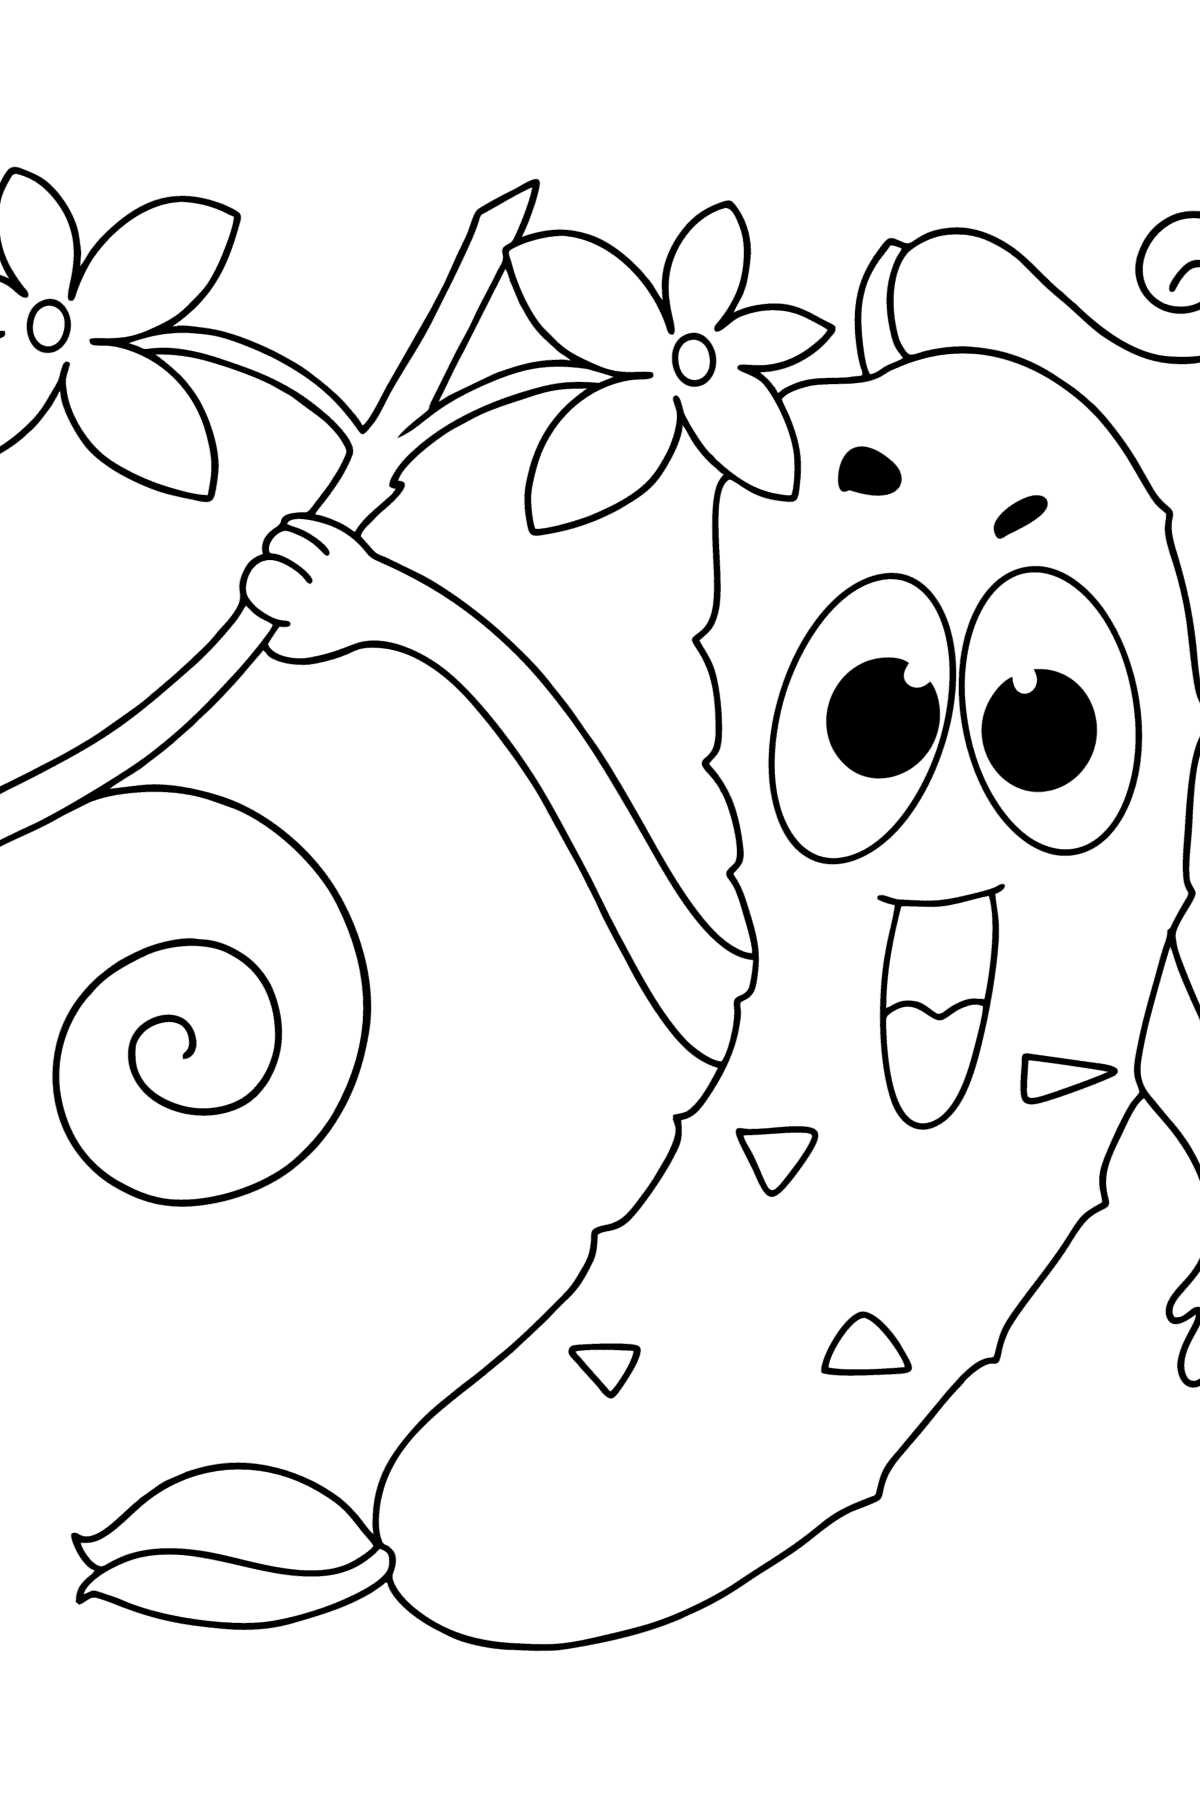 Cute cucumber сoloring page - Coloring Pages for Kids